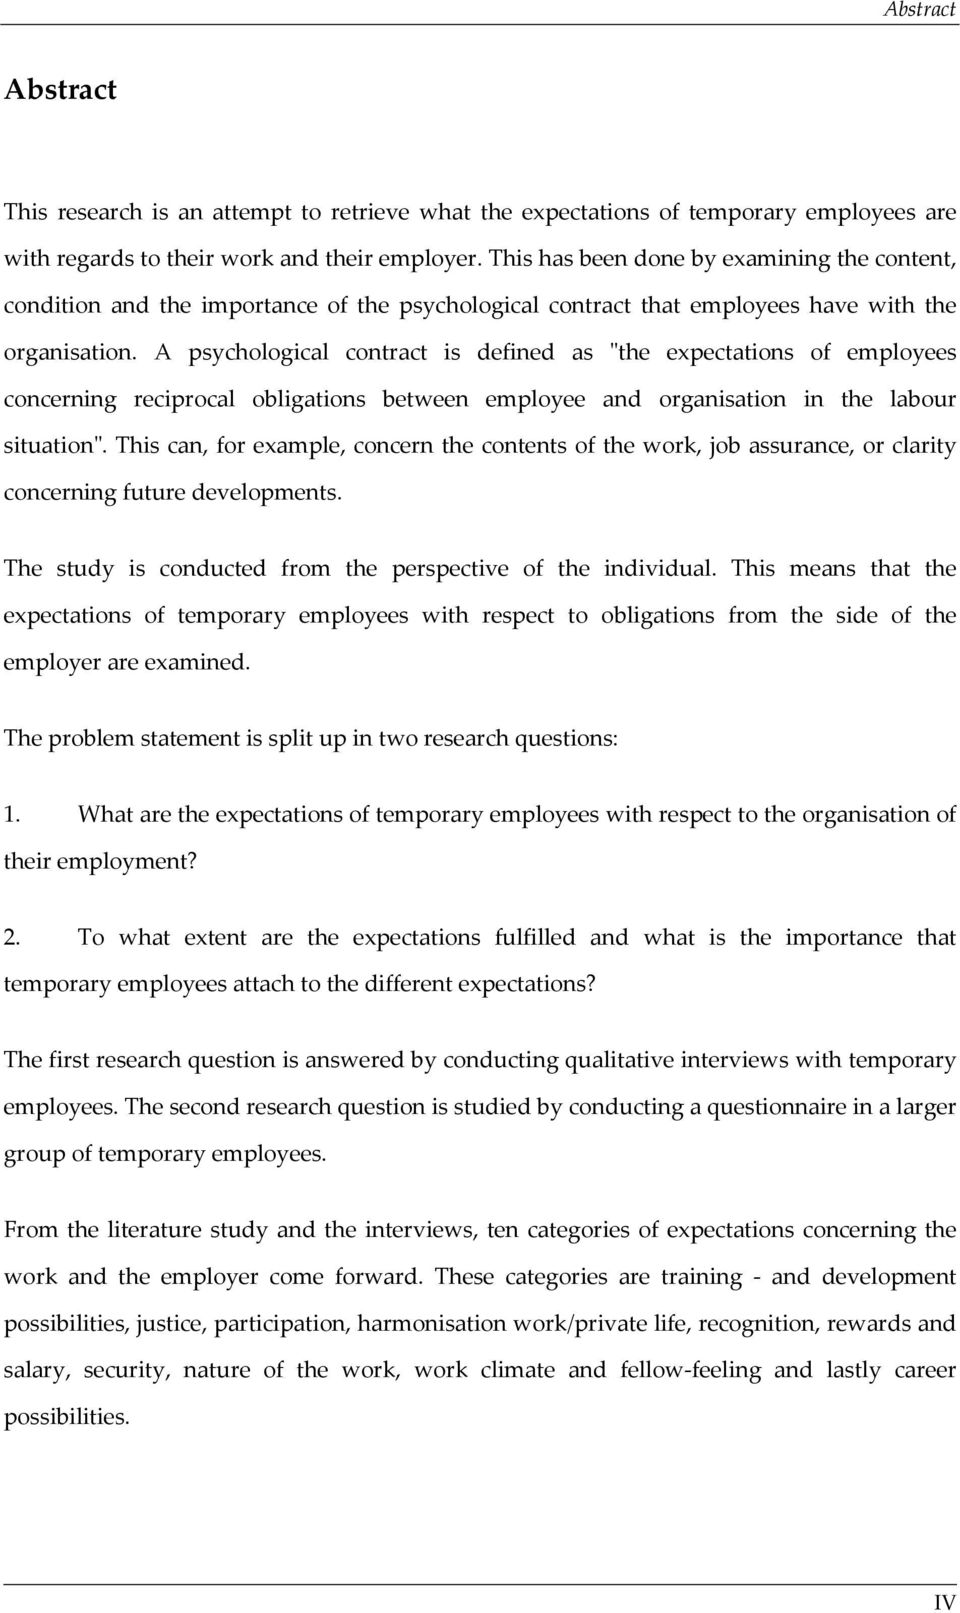 A psychological contract is defined as "the expectations of employees concerning reciprocal obligations between employee and organisation in the labour situation".